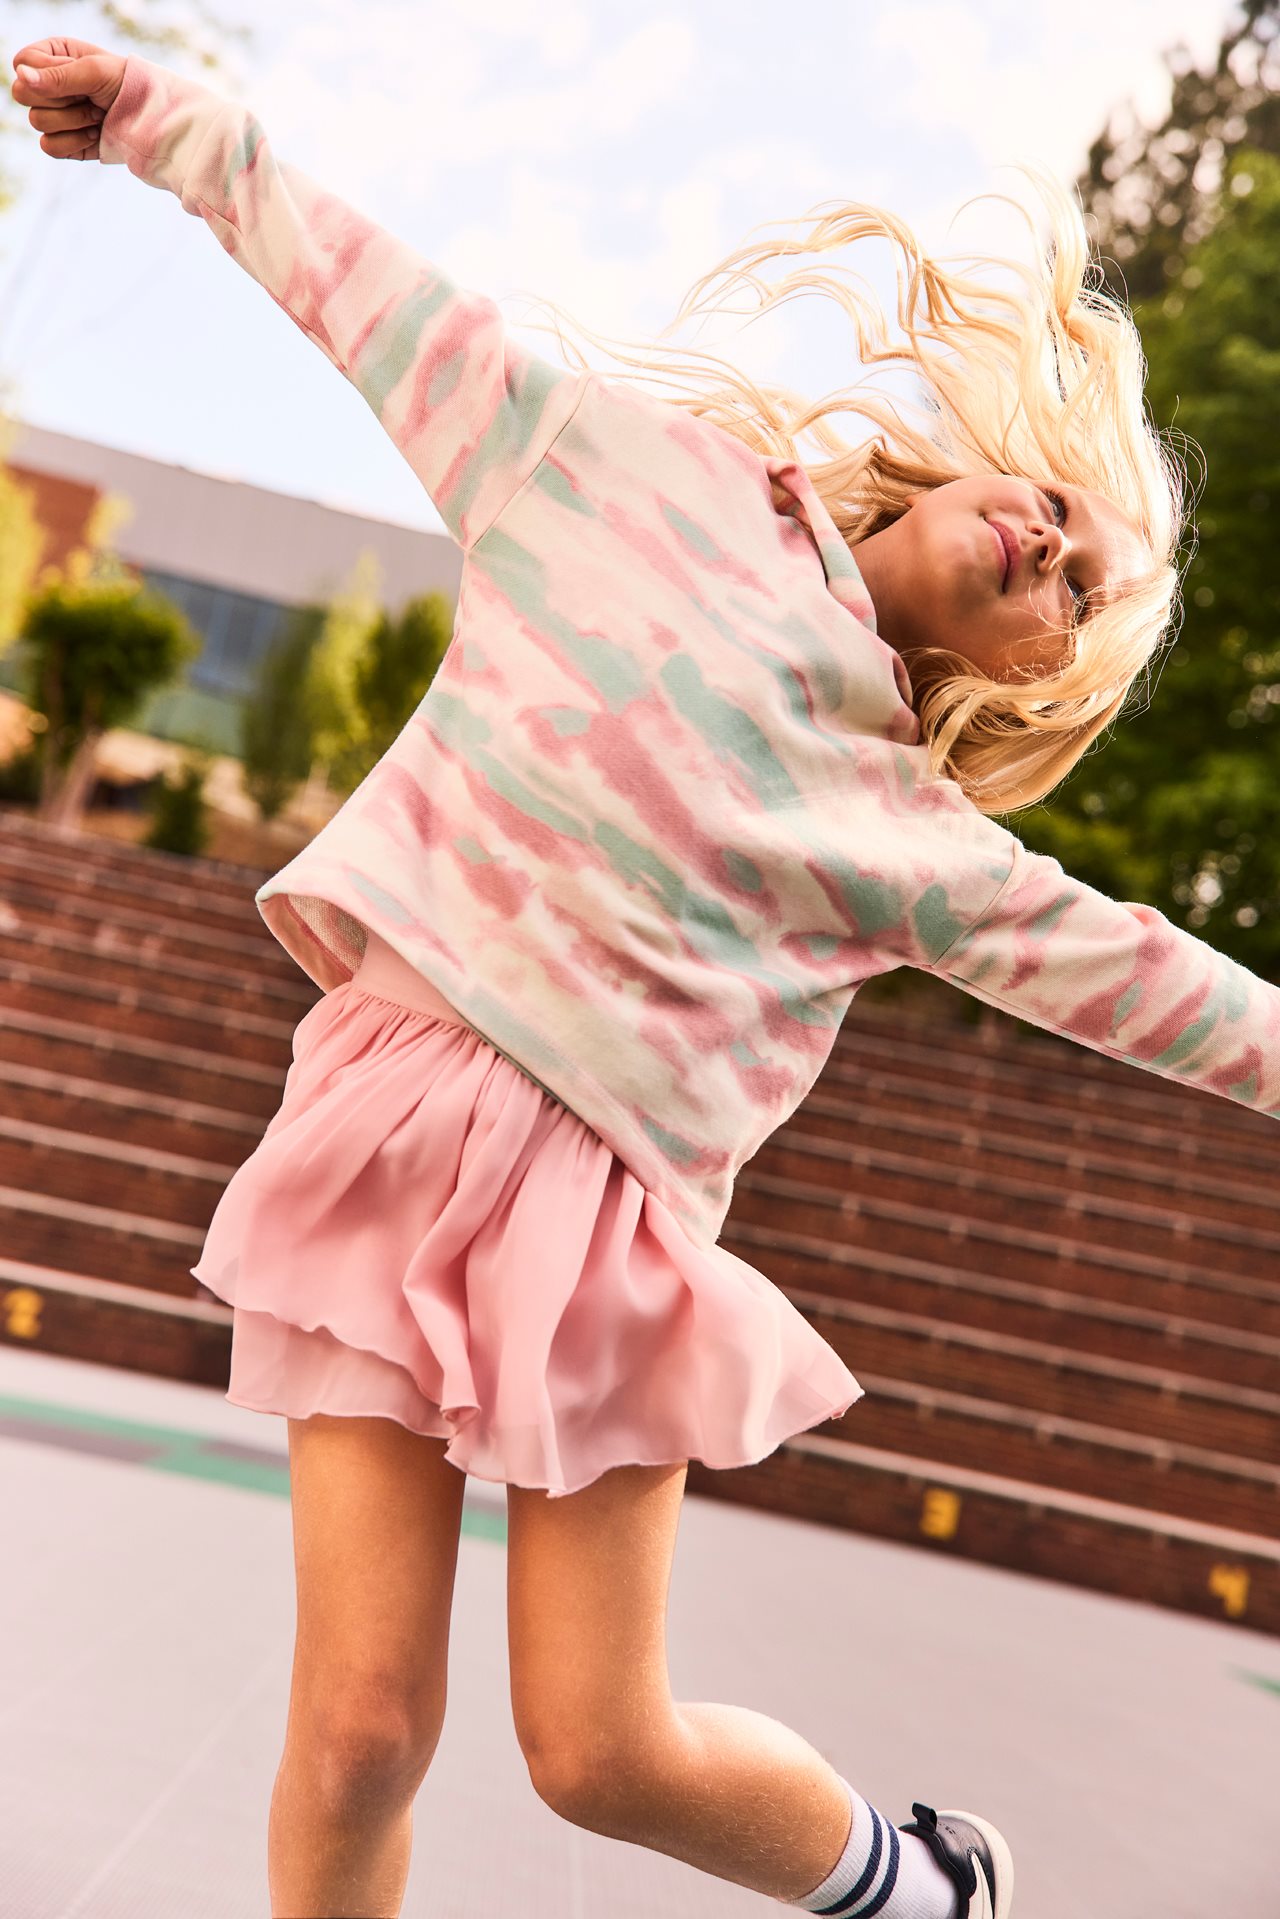 Happy girl wearing a new sweater and skirt spinning around on the playground.